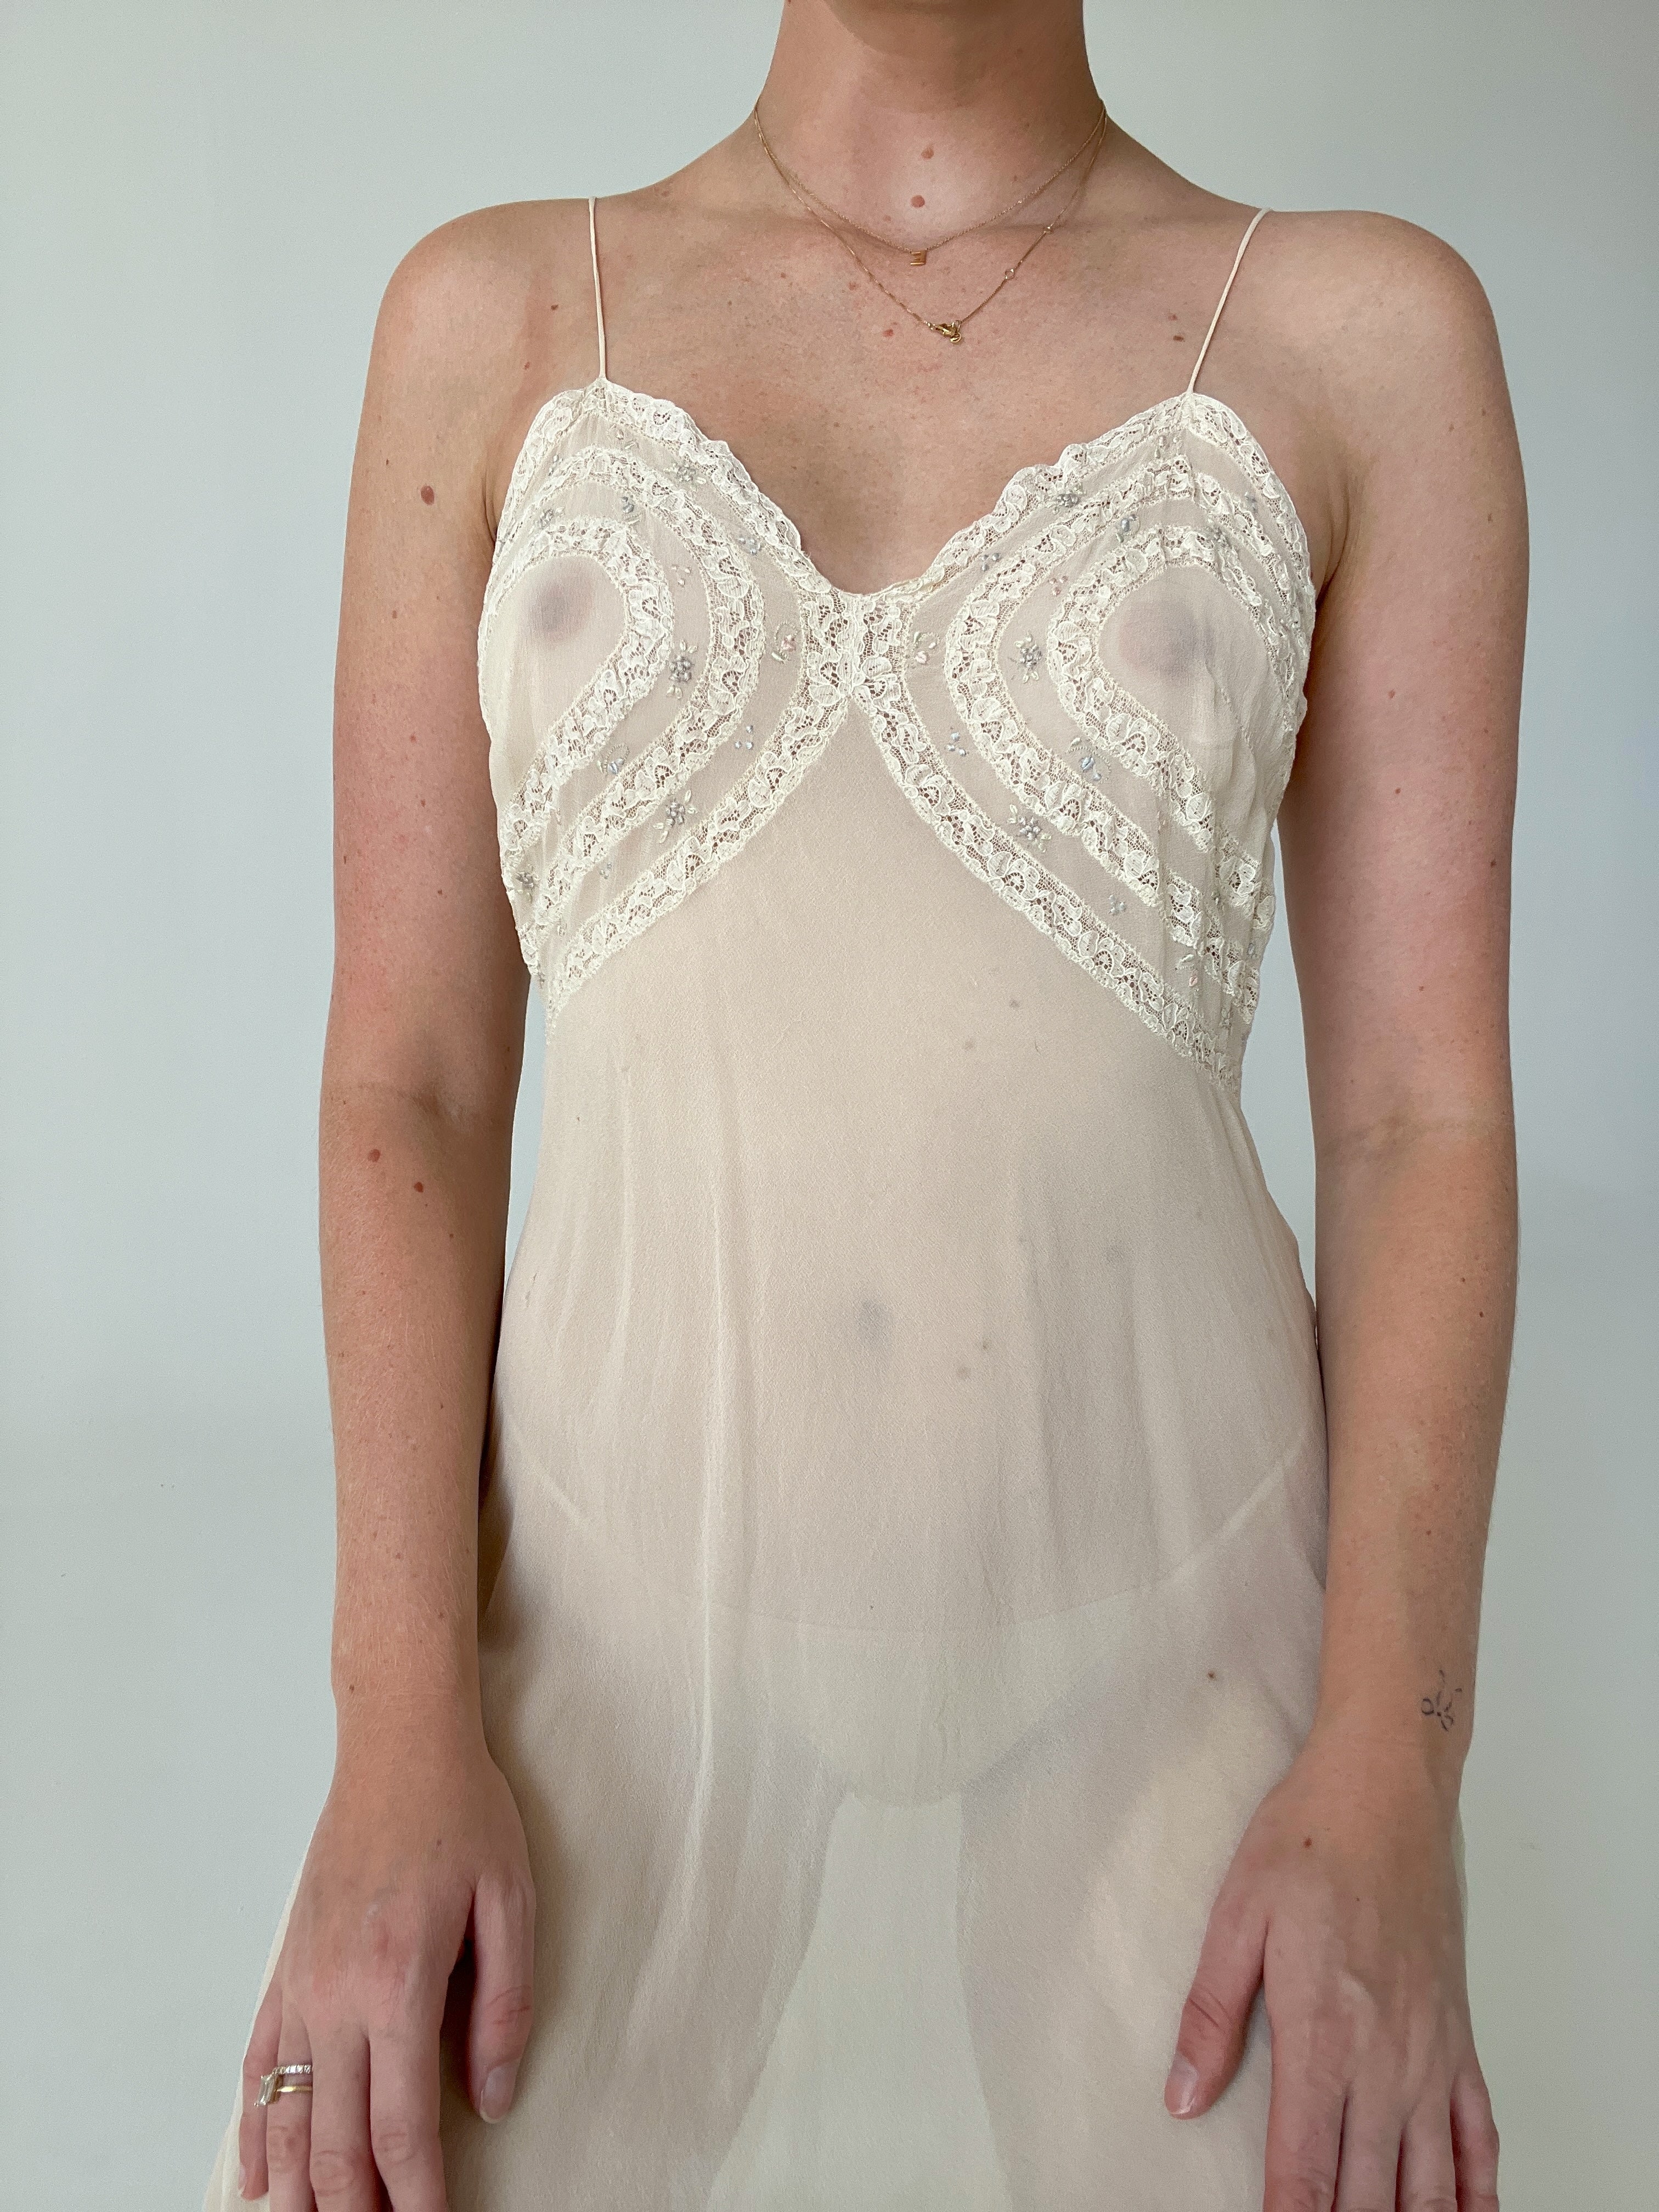 1930's Silk Chiffon Slip with Floral Embroidery